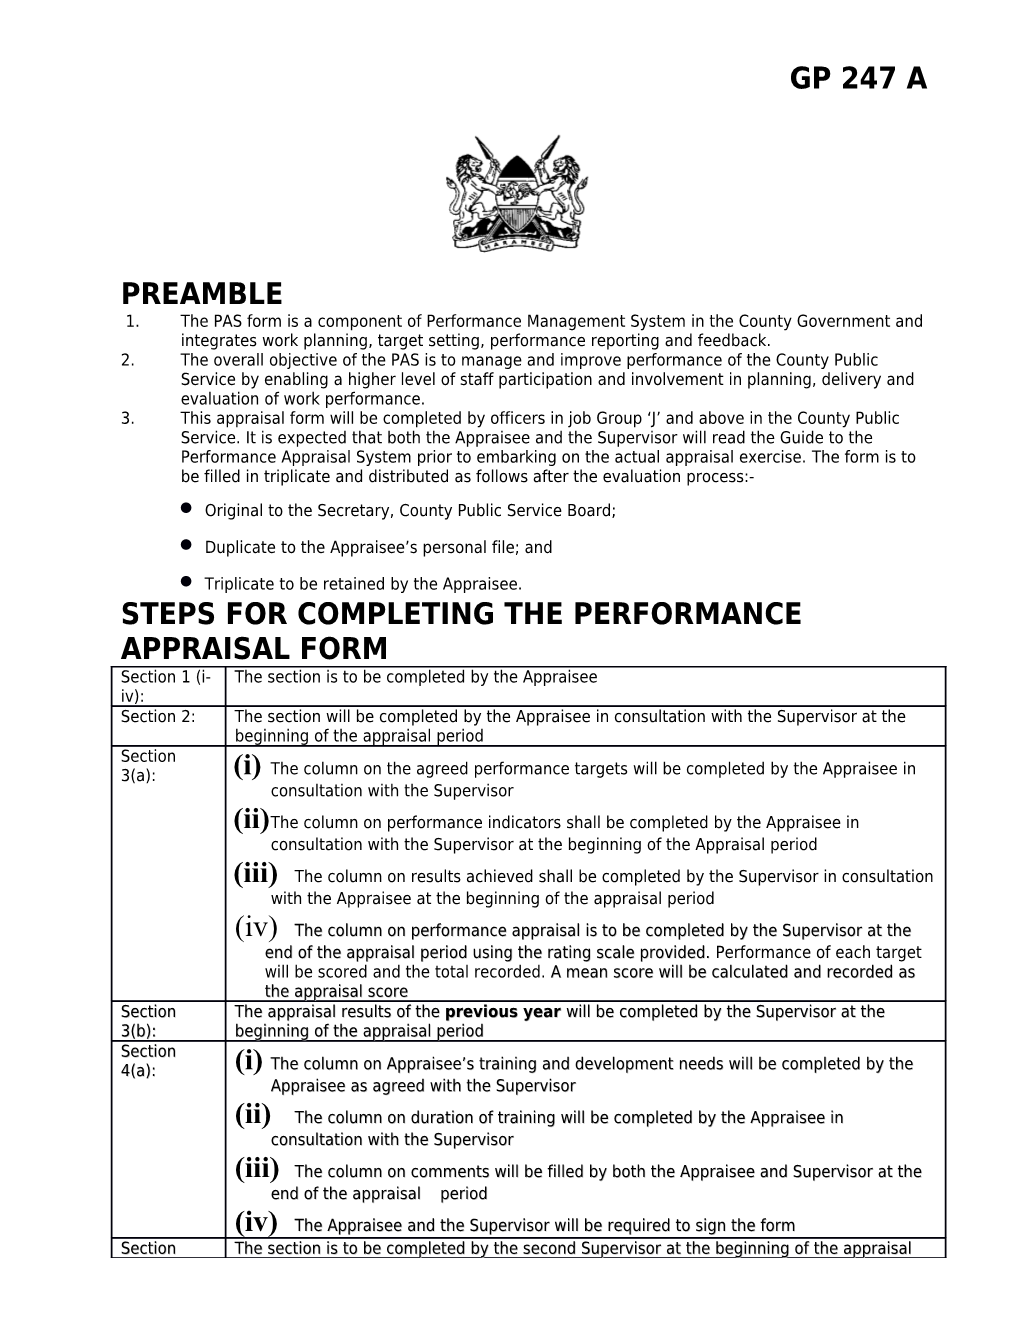 1.The PAS Form Is a Component of Performance Management System in the County Government